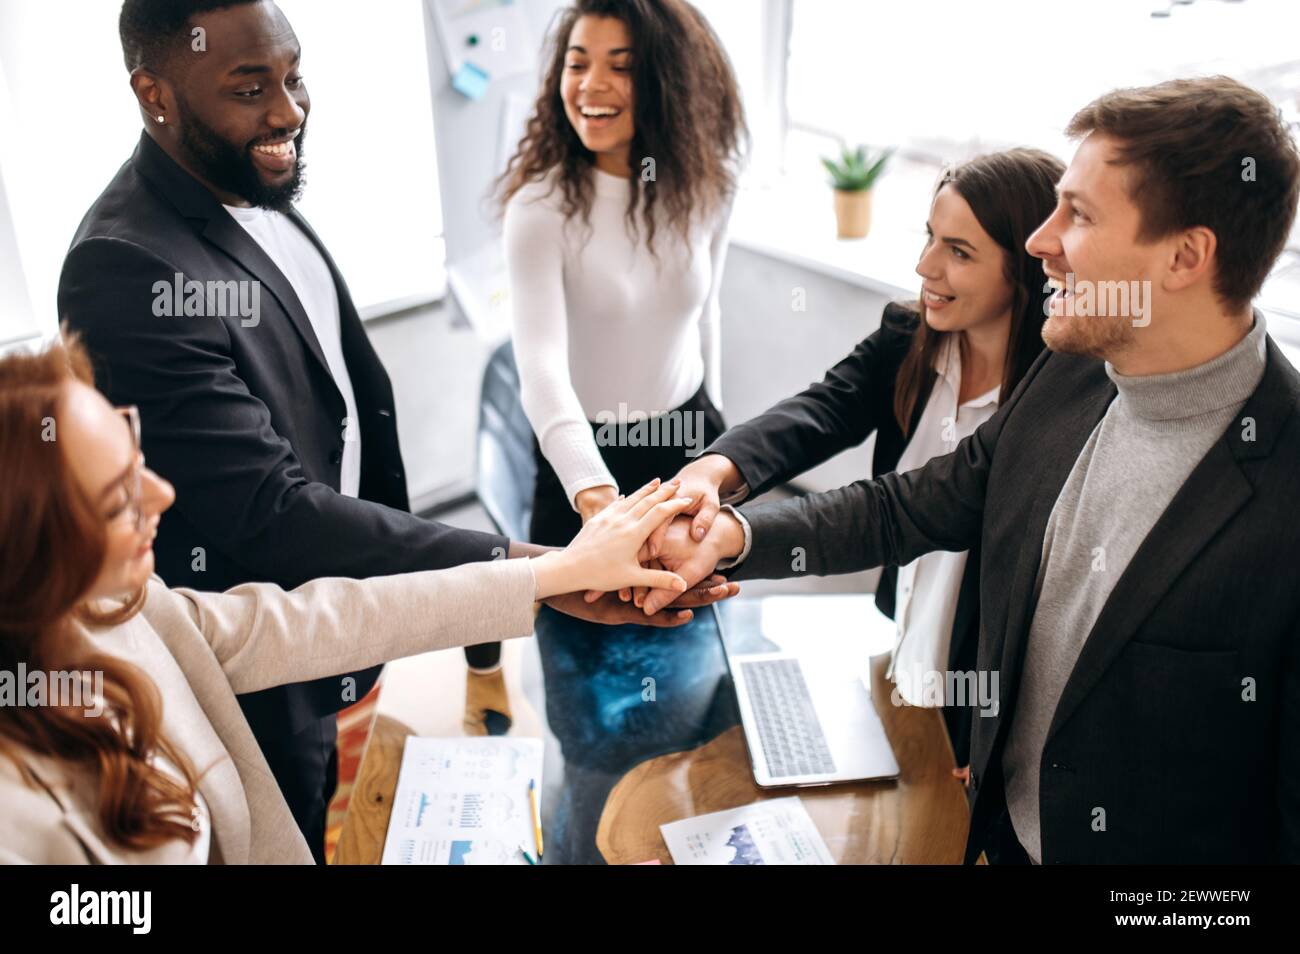 Great Teamwork Mixed Race Successful Business Team Puts Their Hands Together Over A Workplace In Their Modern Creative Office Enjoy Of A Good Job Unity And Teamwork Concept Stock Photo Alamy